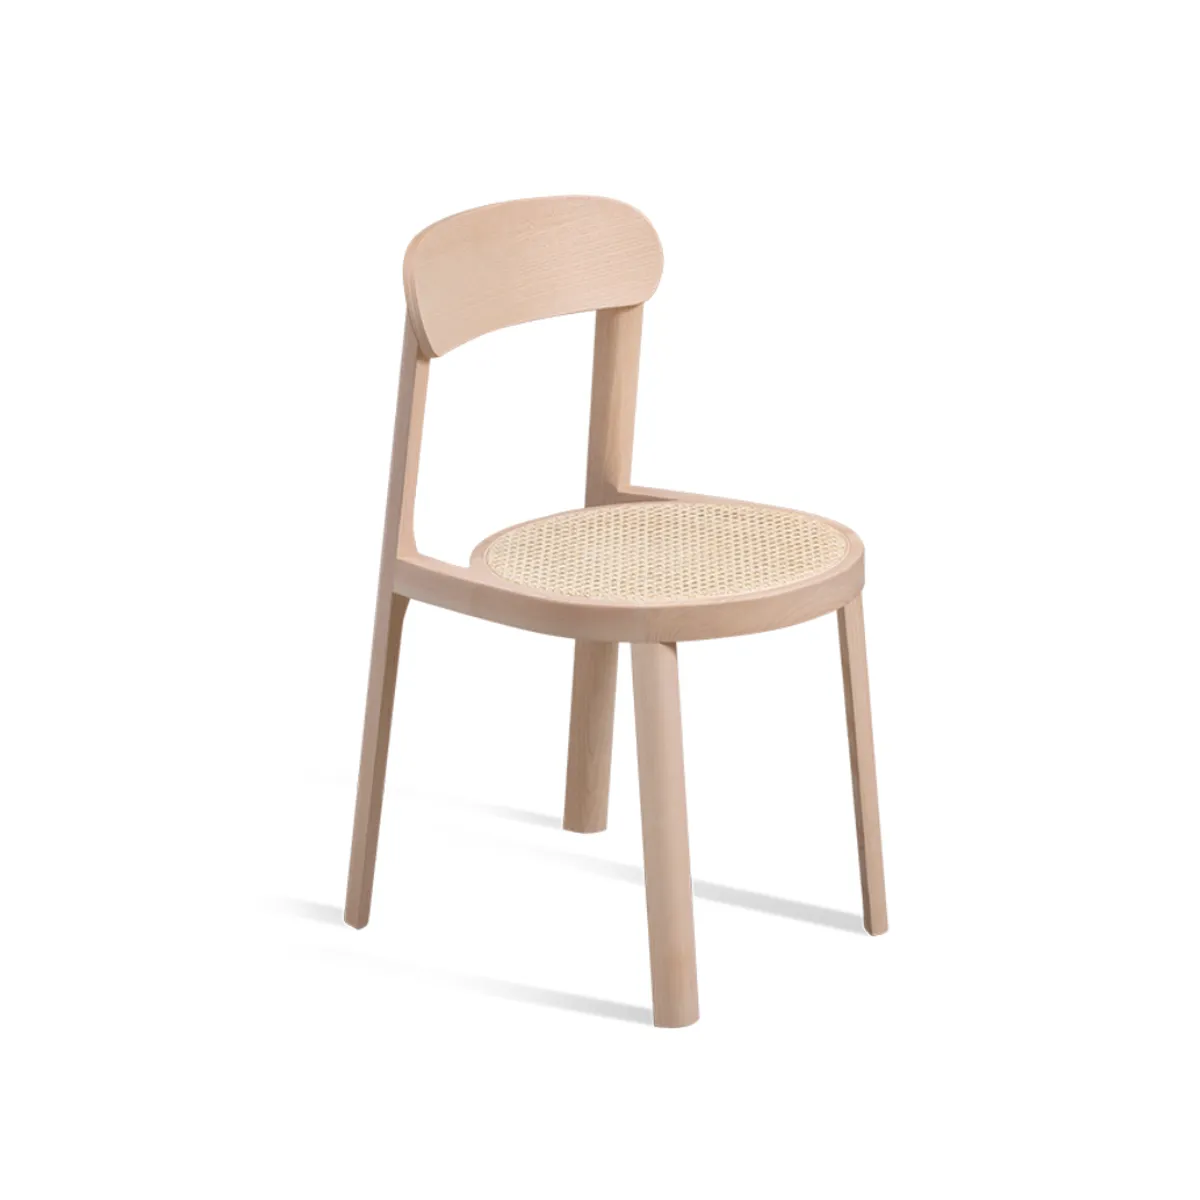 Brulla side chair 1